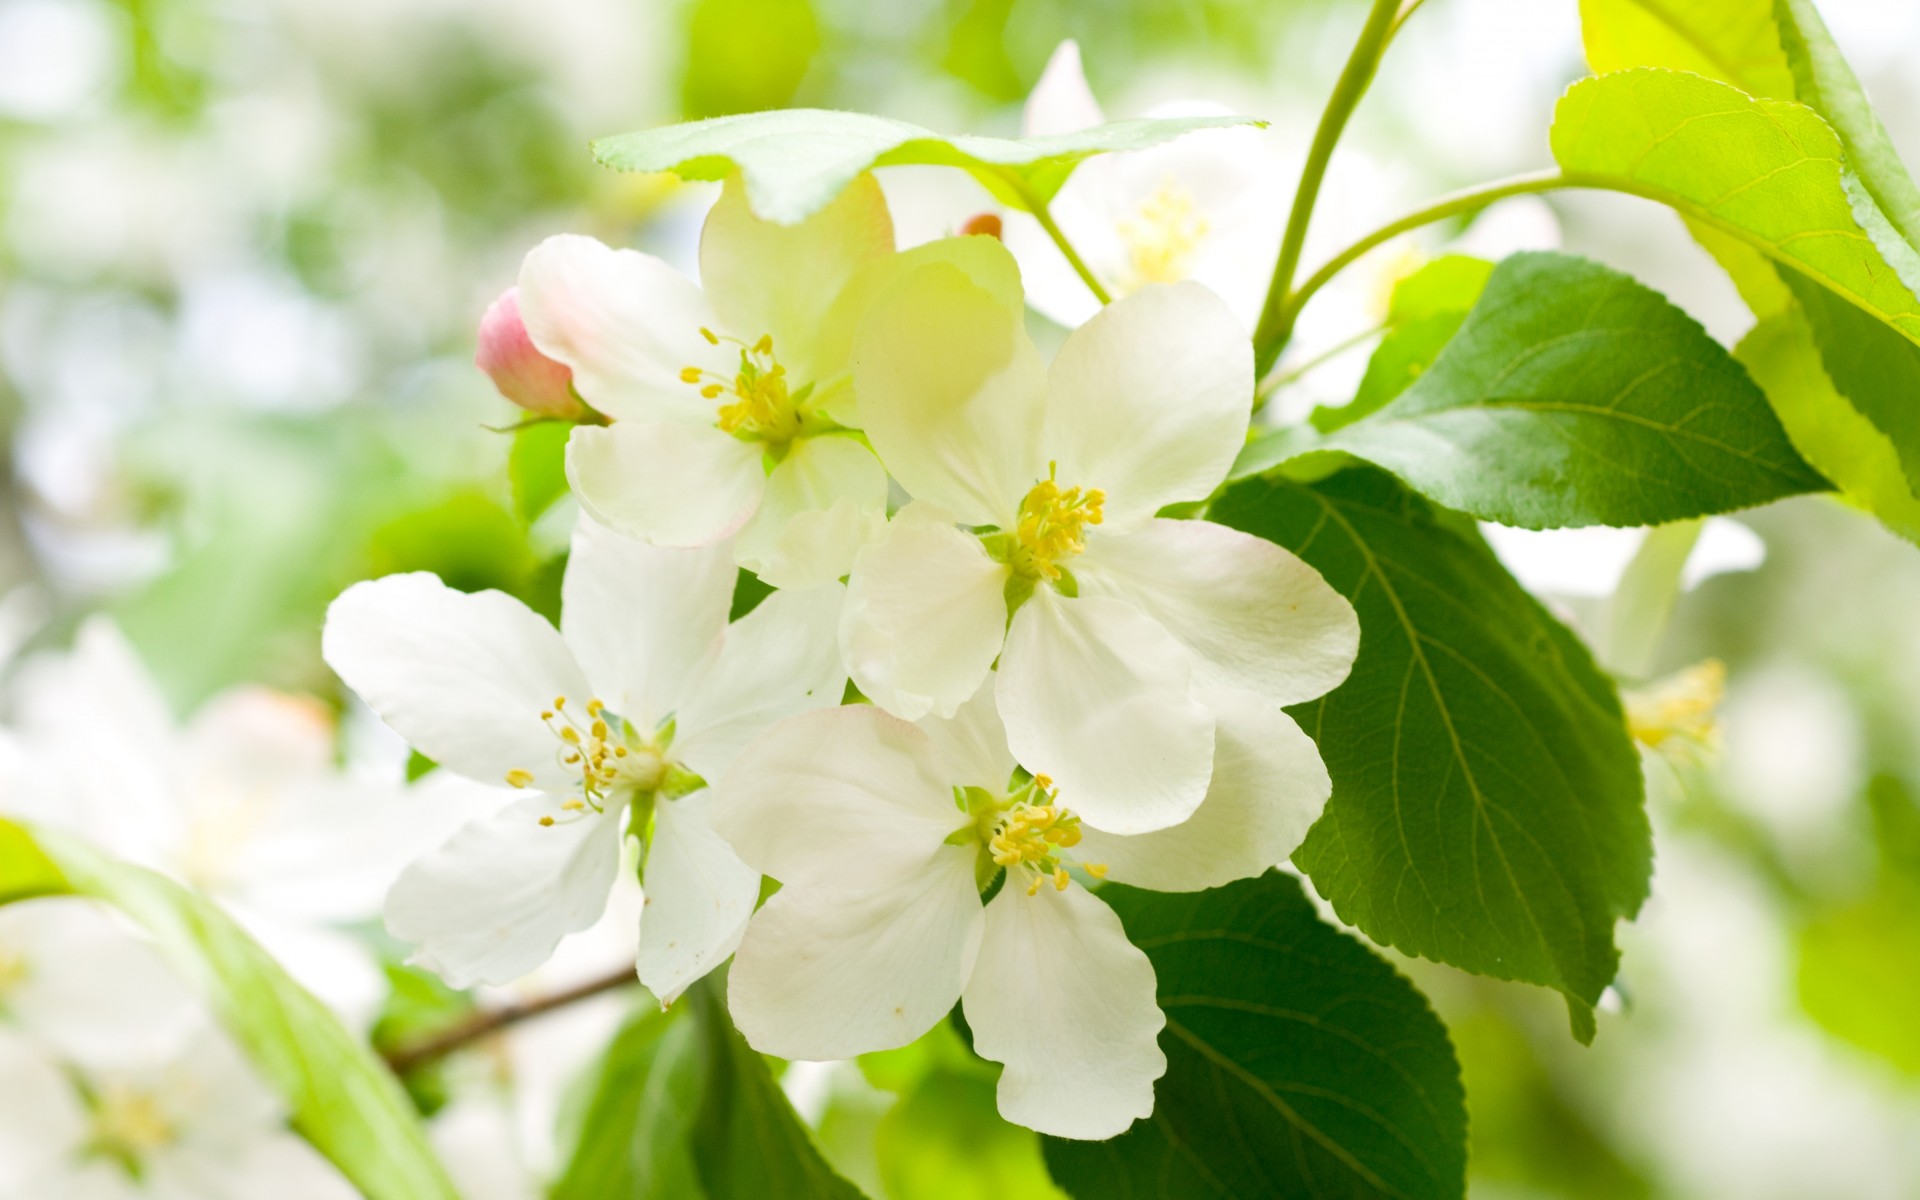 cherry, Blossom, Spring, Flowers, White, Petals, Branches, Trees, Leaves, Green Wallpaper